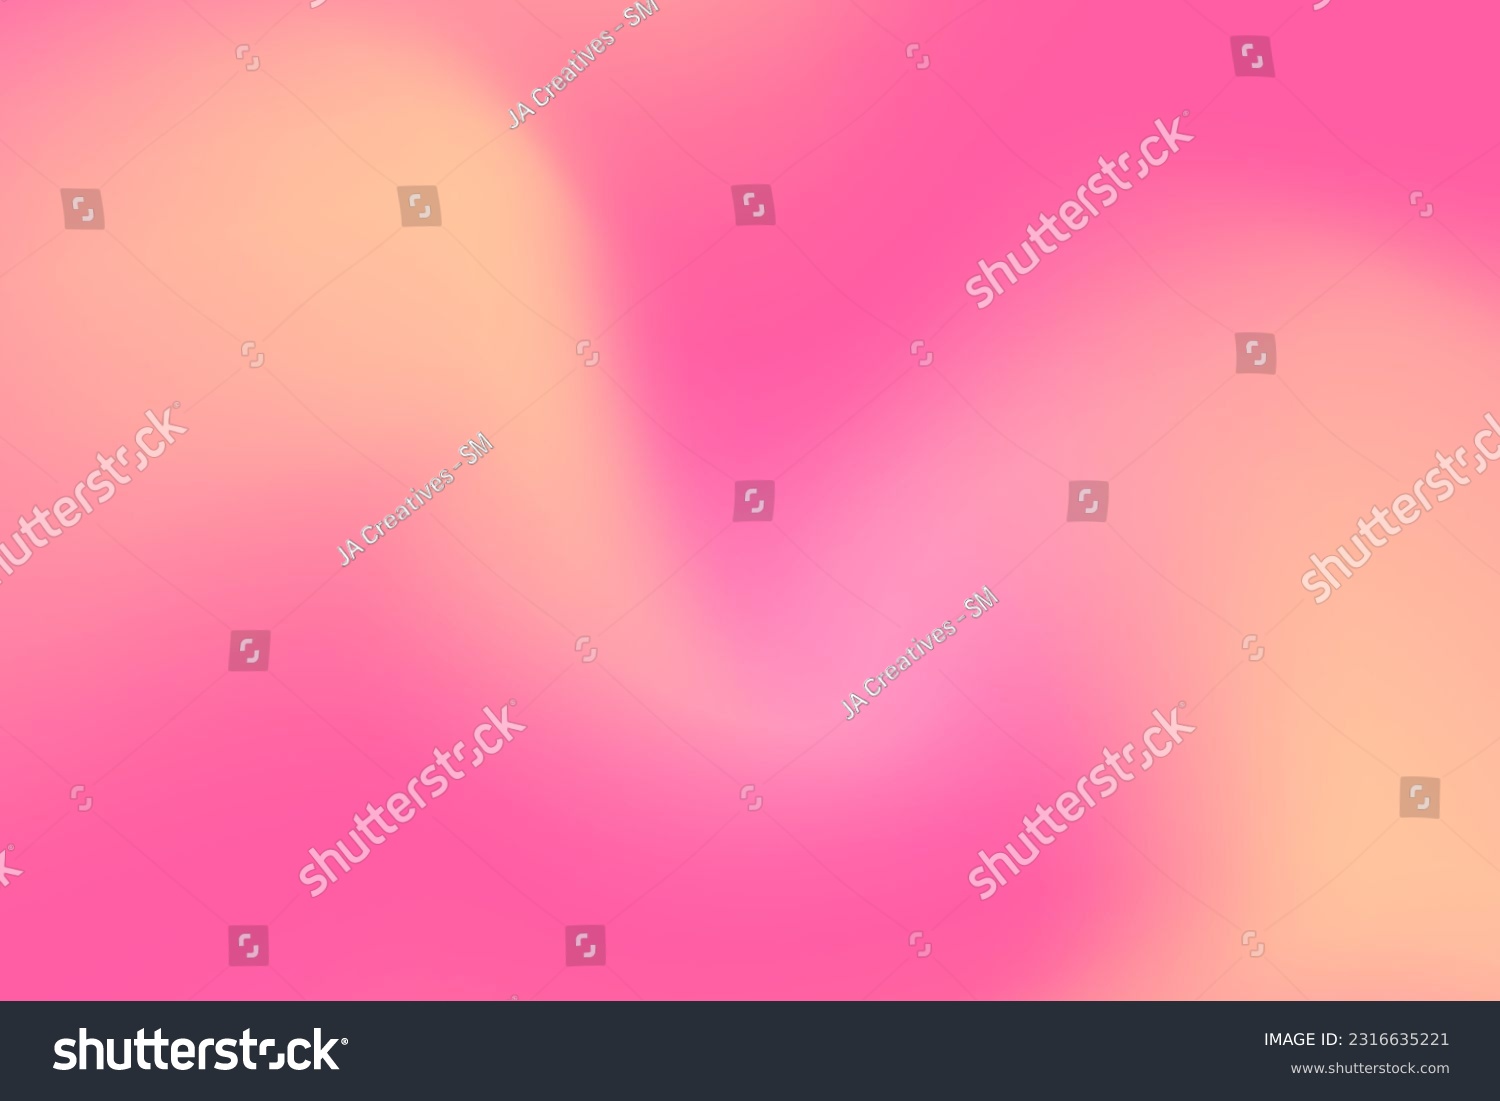 SVG of Vibrant pastel sunrise color design with flowing watercolor hues. Swirling gradient mesh in shades of pink, red, and magenta. Rose and salmon pink gradient background with a trendy neon touch. EPS 10 svg